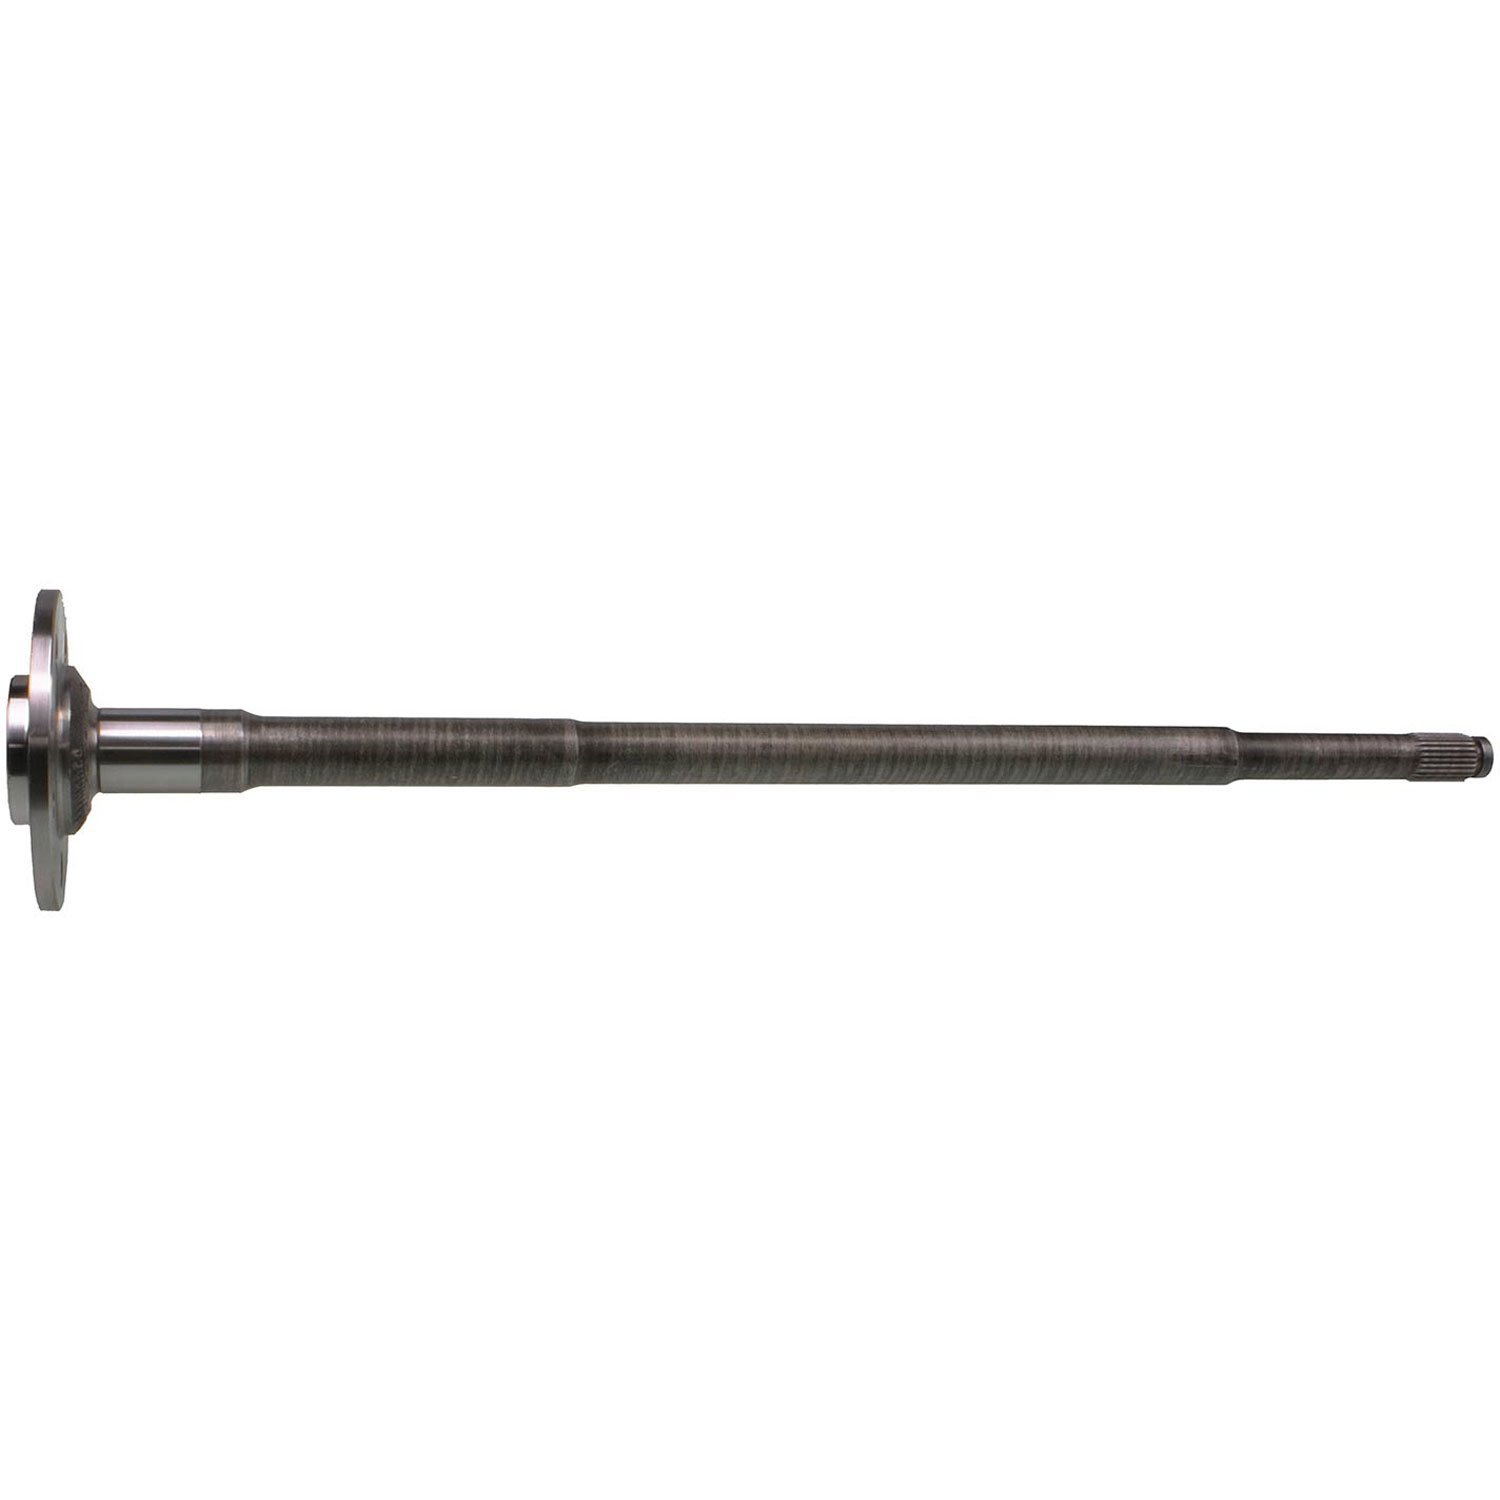 Axle Shaft 30.25 in. Overall Length 5 Lugs